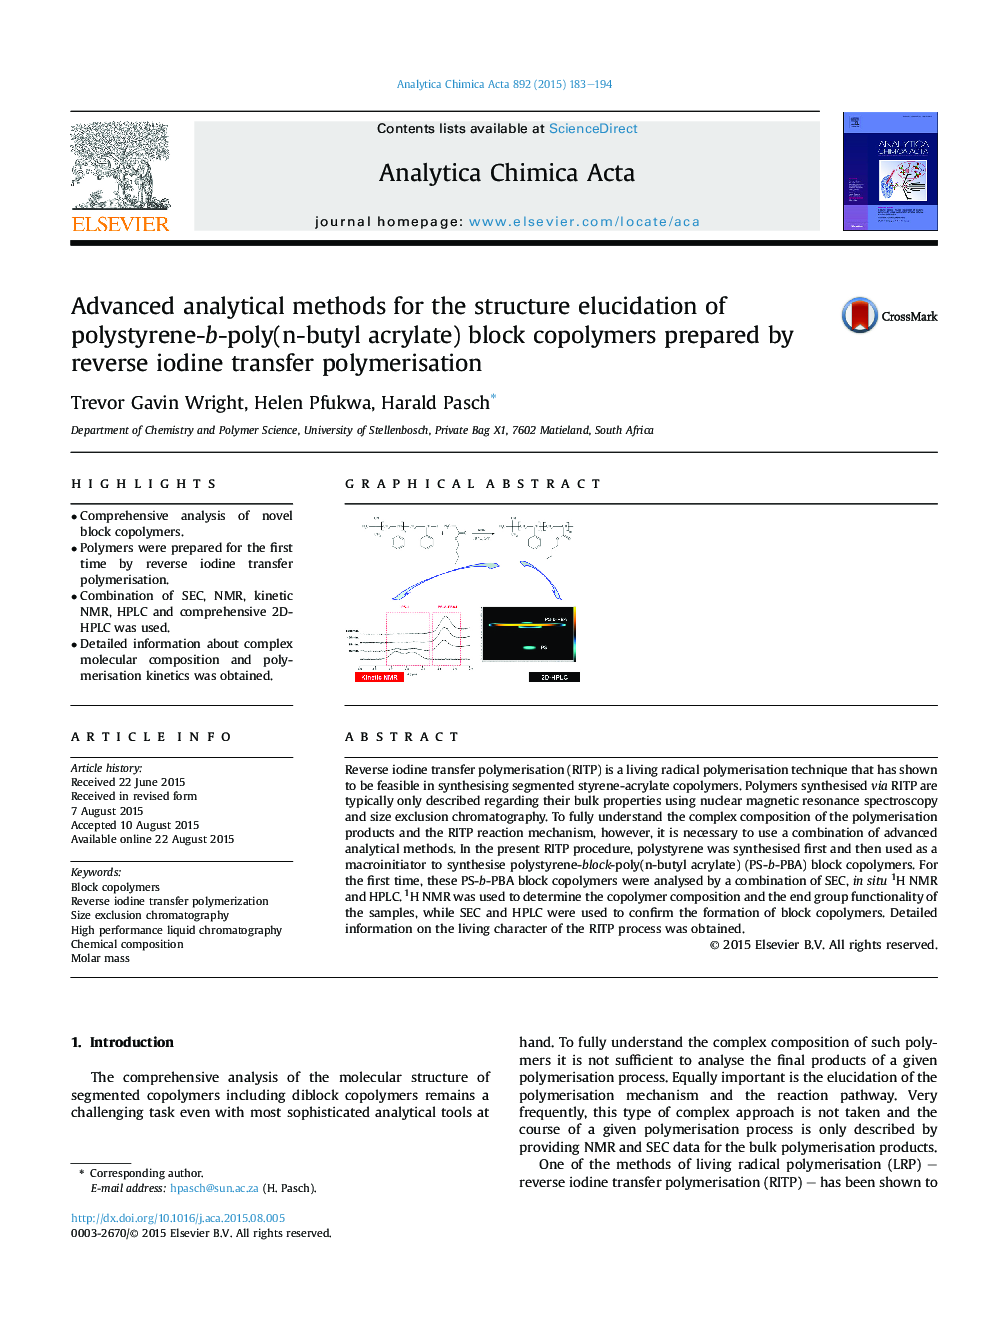 Advanced analytical methods for the structure elucidation of polystyrene-b-poly(n-butyl acrylate) block copolymers prepared by reverse iodine transfer polymerisation